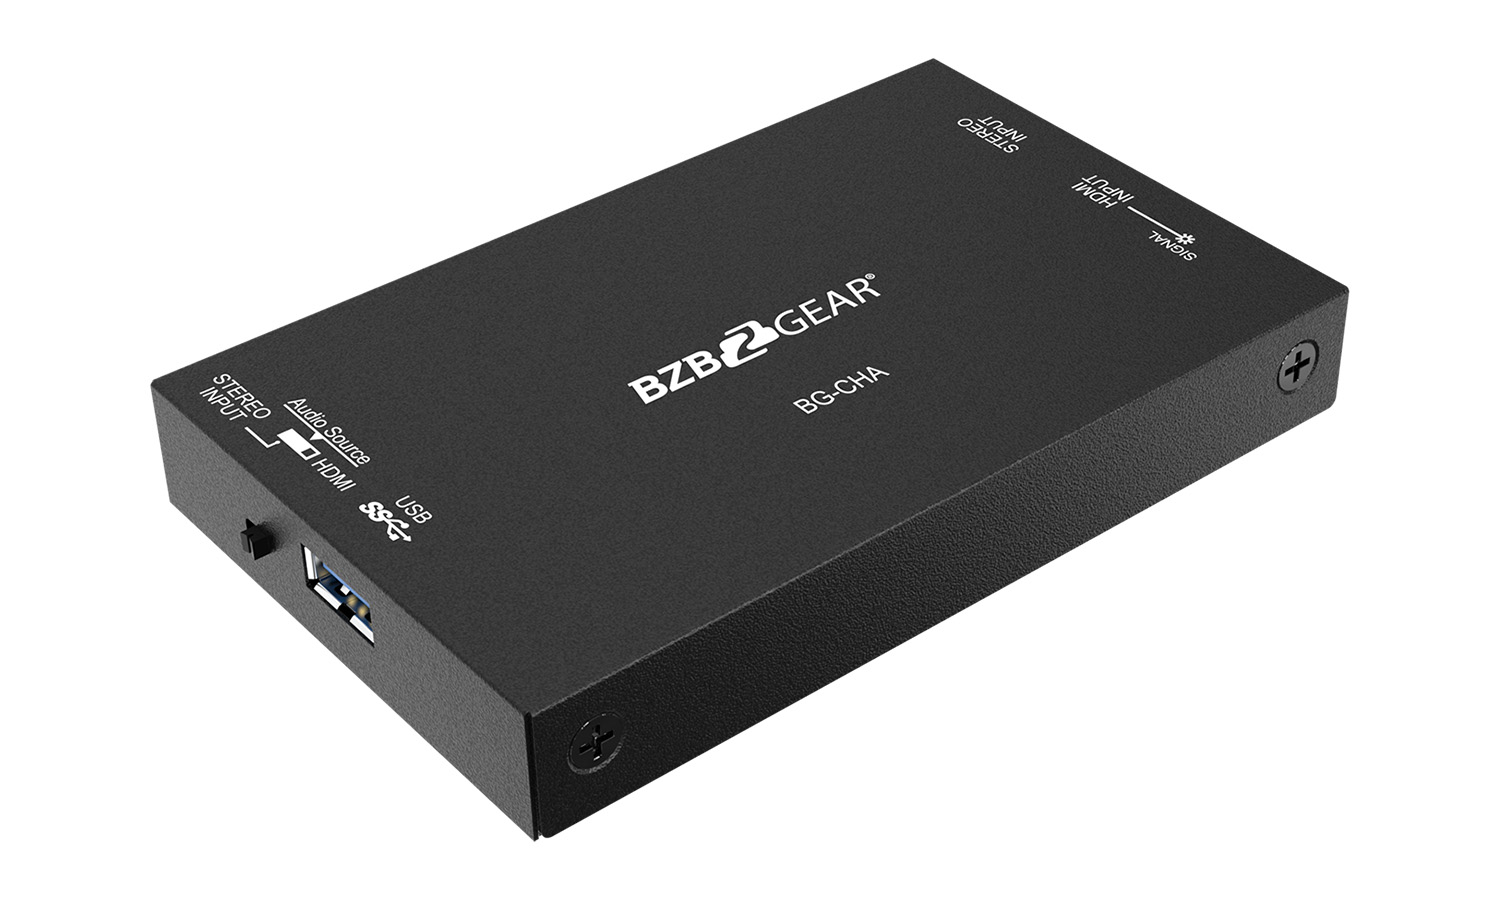 BG-CHA USB 3.1 Gen 1 Full HD Video Capture Device with Scaler and Audio by BZBGEAR